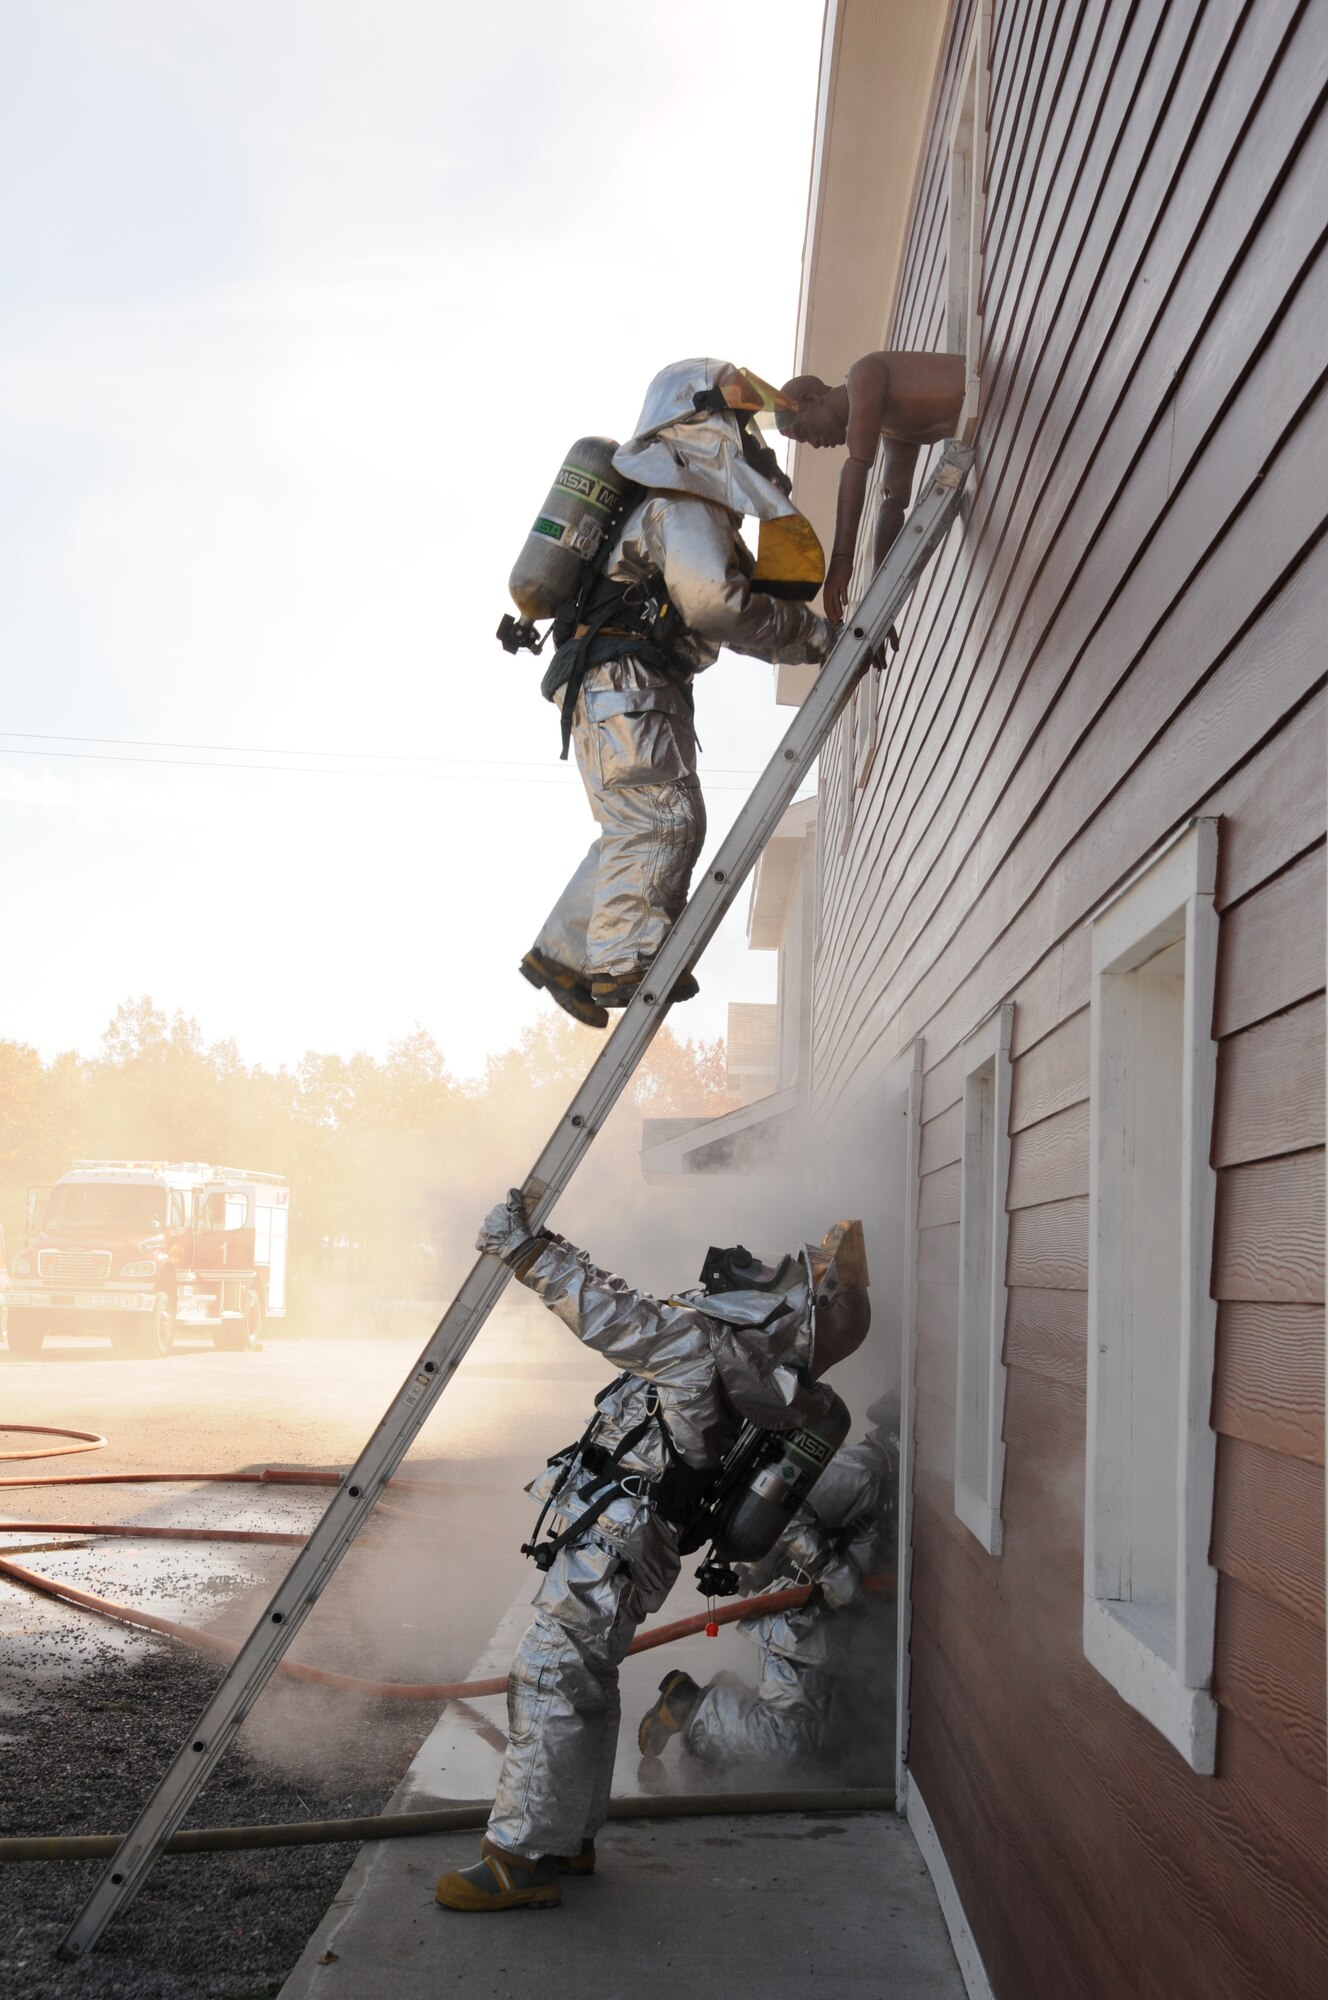 U.S. Air Force firefighters from the 180th Fighter Wing, rescue simulated victims from a burning building during a training exercise at the Phelps Collins Combat Readiness Training Center, Alpena, Michigan, October 16, 2010.  Firefighters from the 180 FW are doing annual training to prepare them for various rescue situations. (U.S. Air Force photo by Senior Airman Amber Williams/Released)